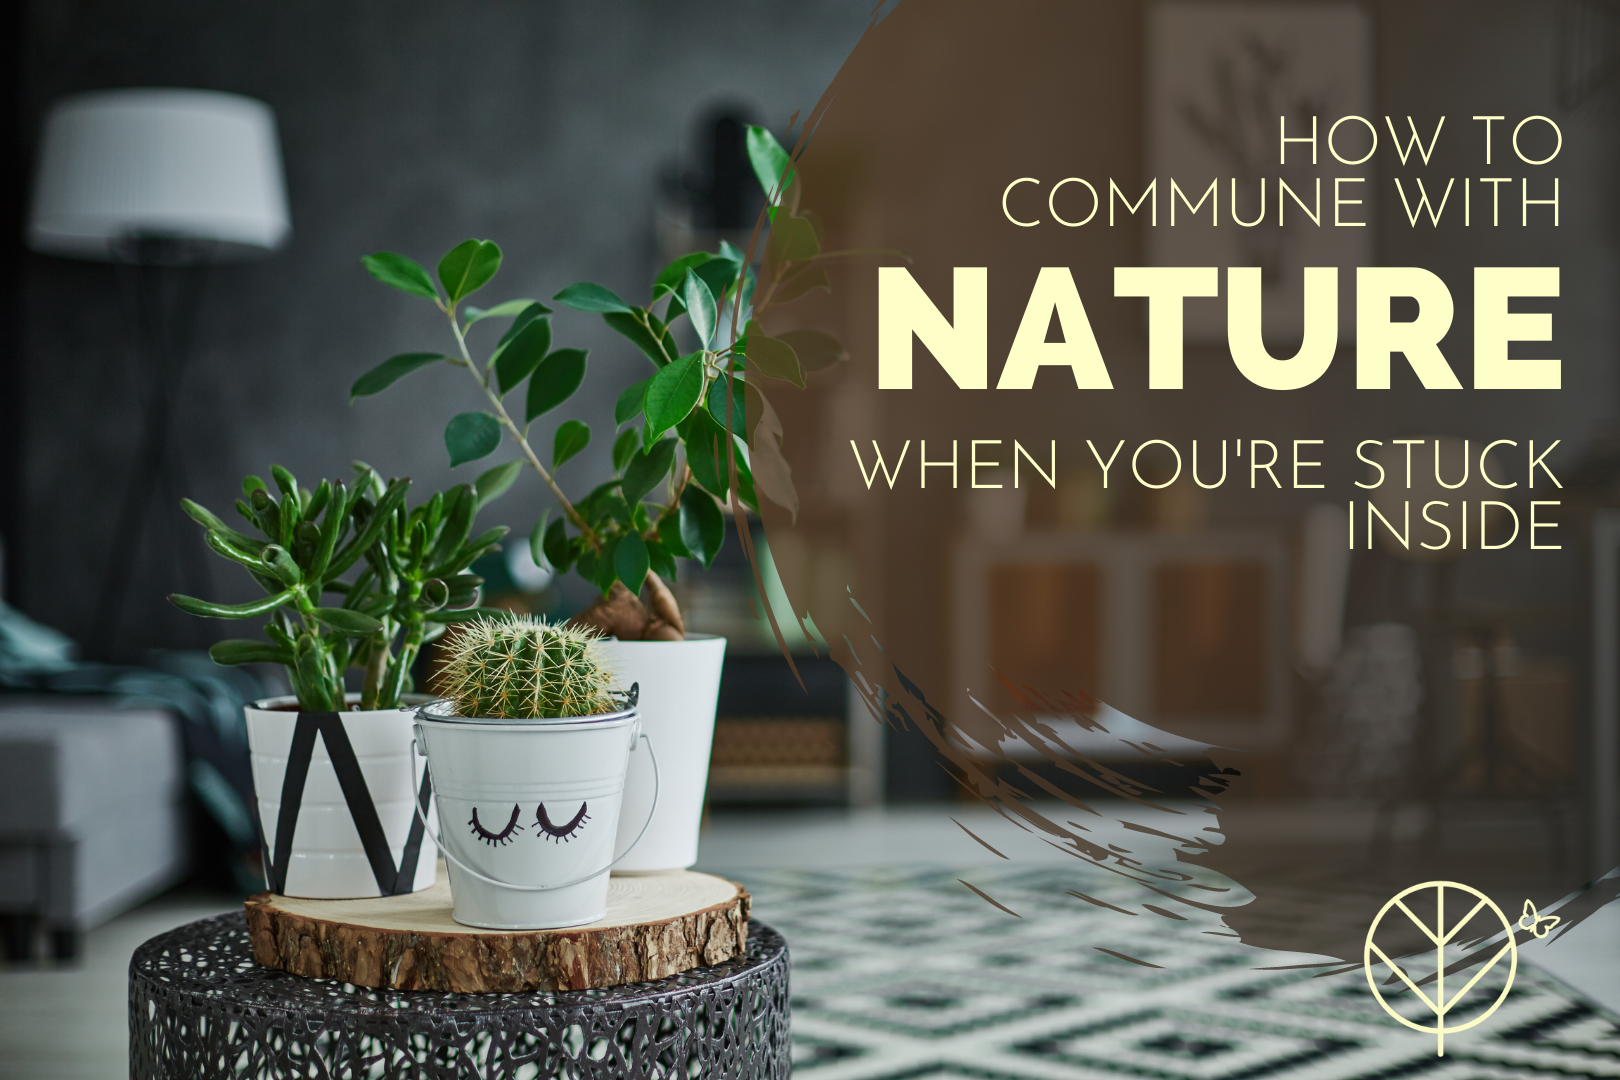 How to Commune With Nature When You're Stuck Inside | by Julietta Watson |  Oct, 2020 | Medium